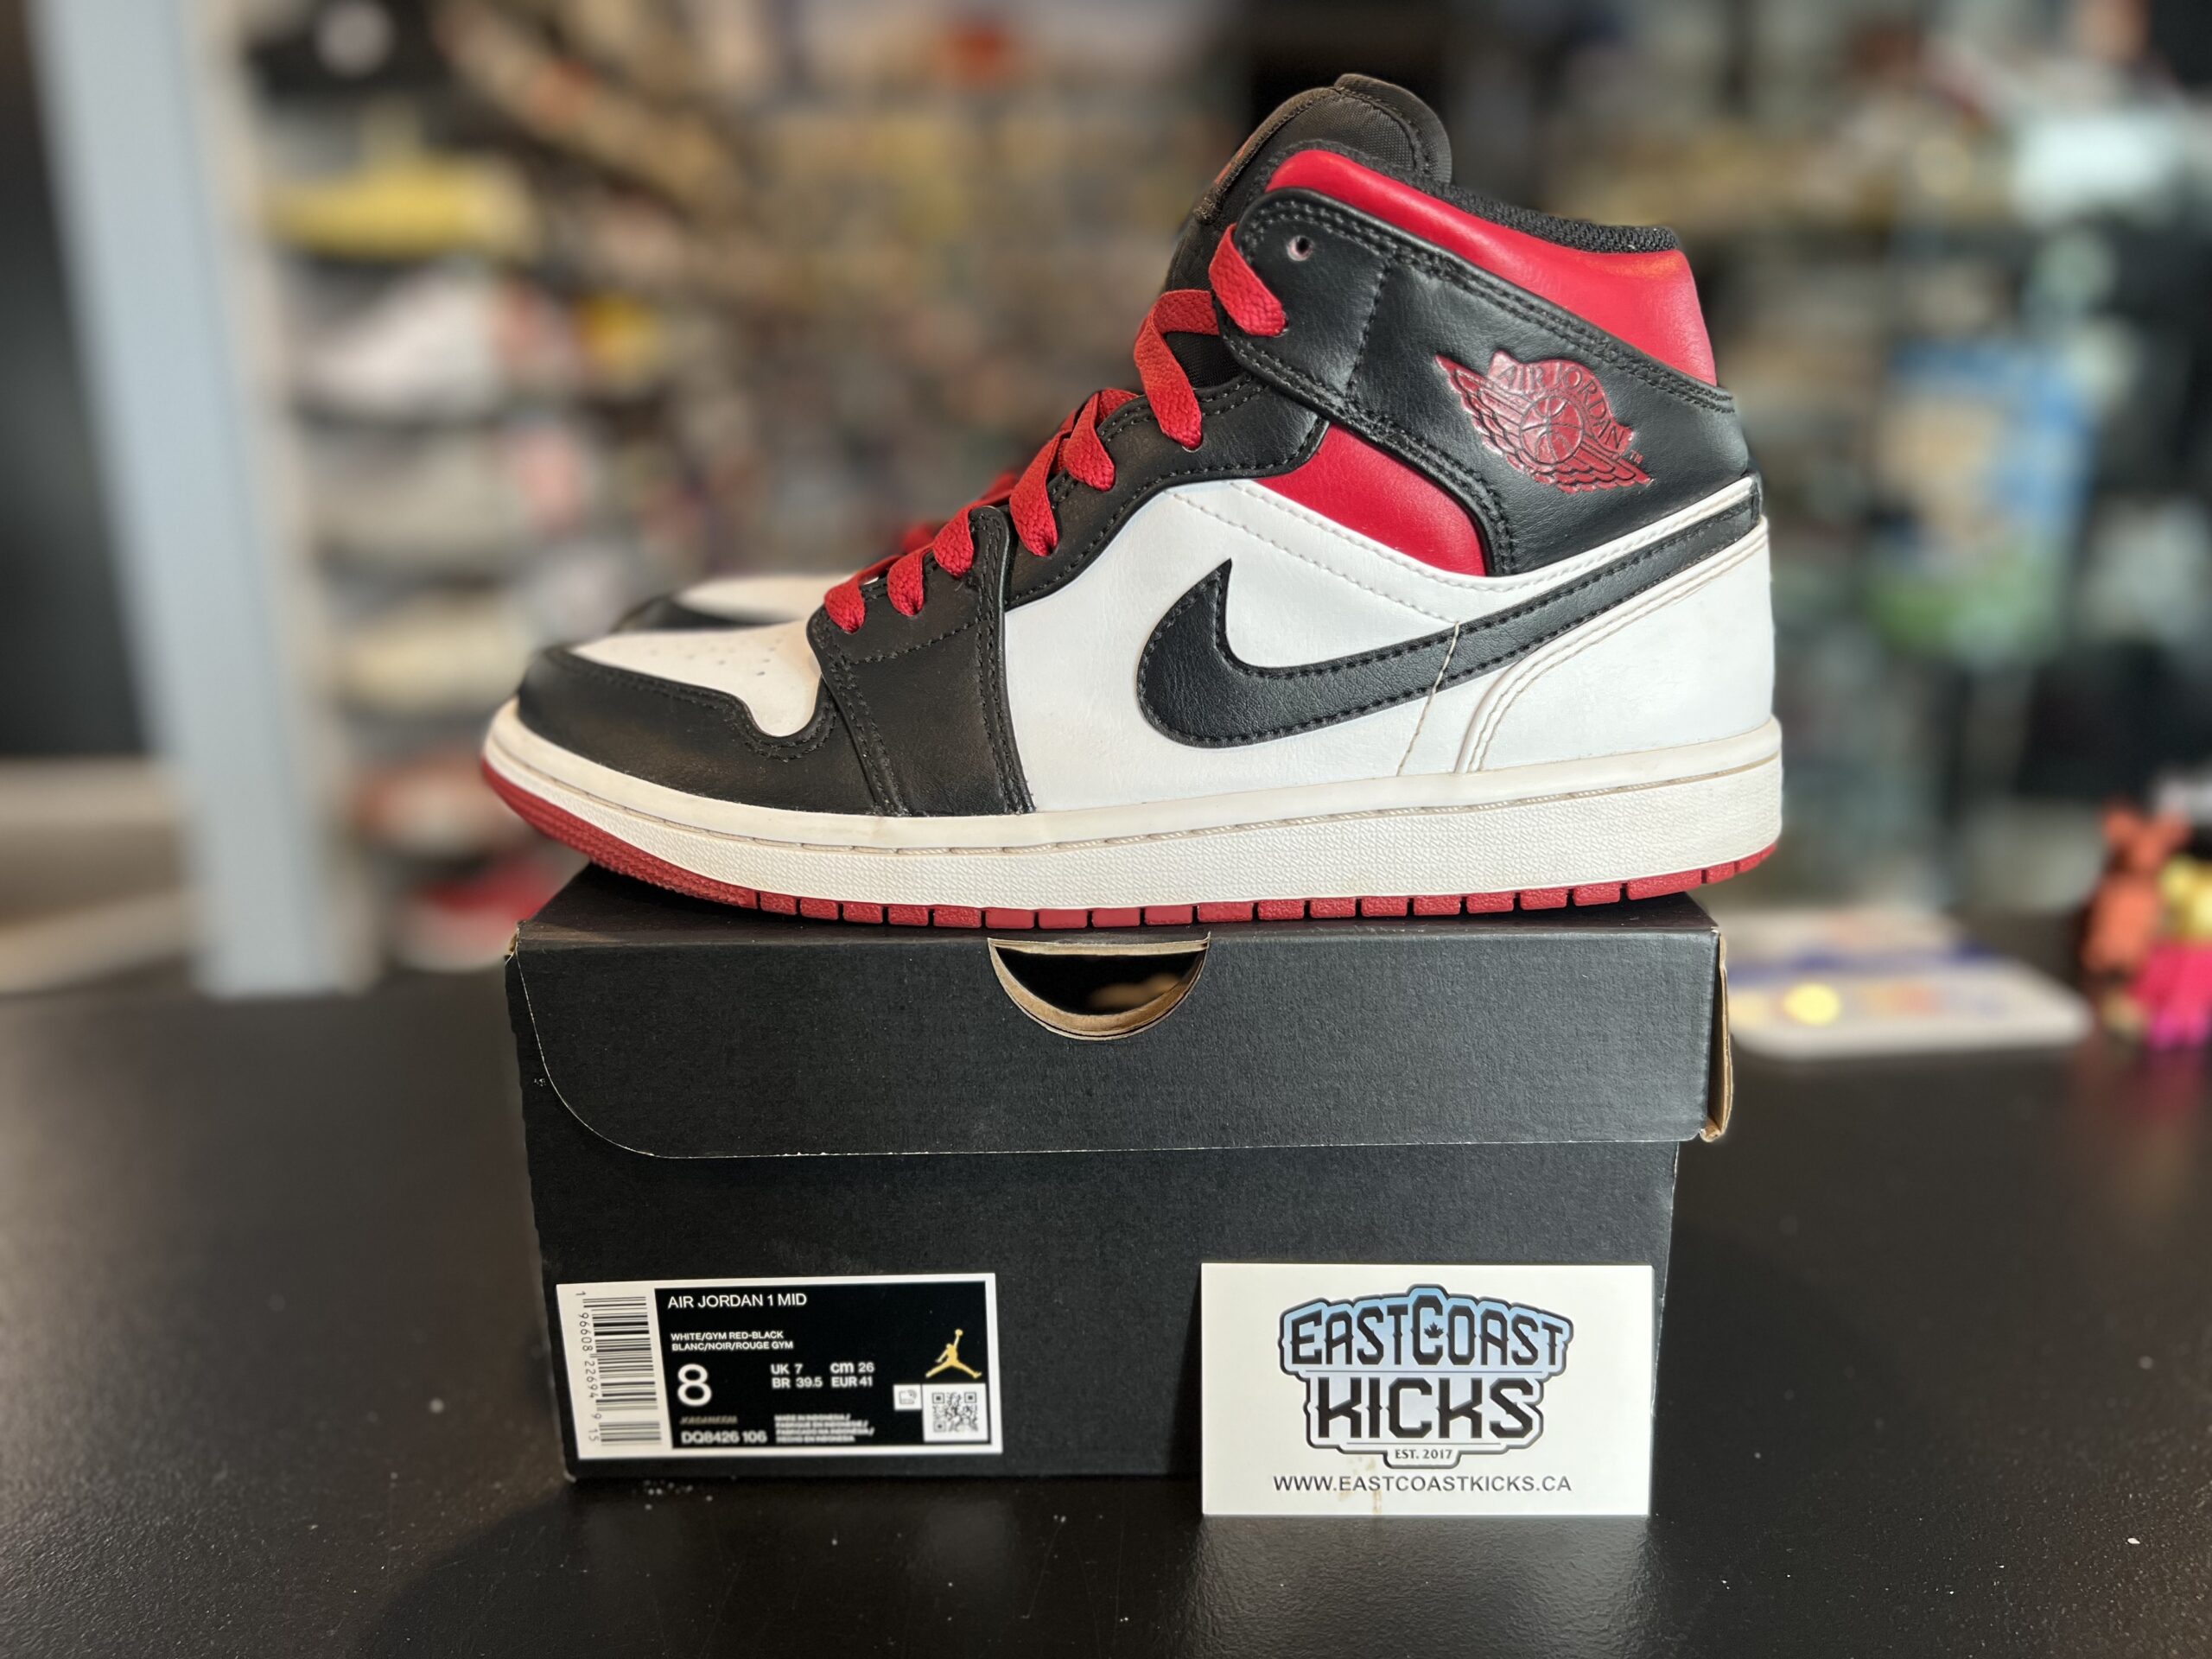 Preowned Jordan 1 Mid Gym Red Black Toe Size 8